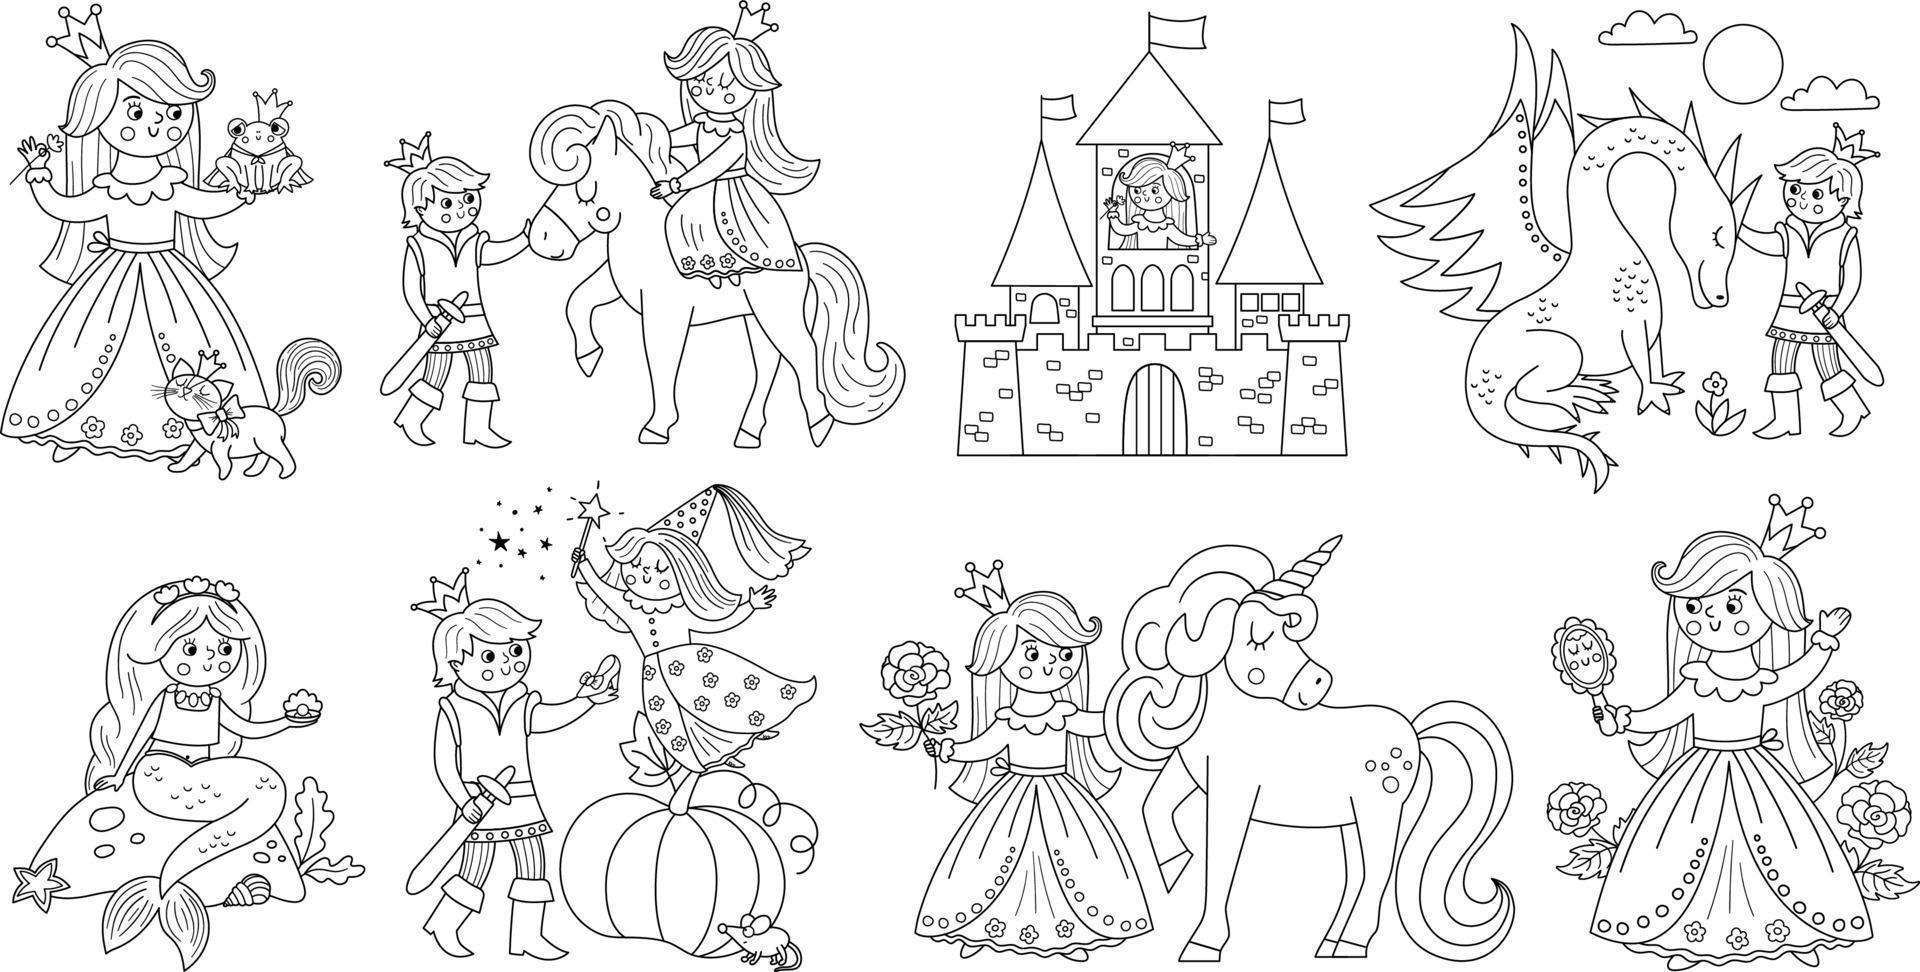 Fairy tale black and white vector princess set. Fantasy line girl collection. Medieval fairytale maid coloring page. Girlish cartoon magic icons pack with sleeping beauty, frog prince.